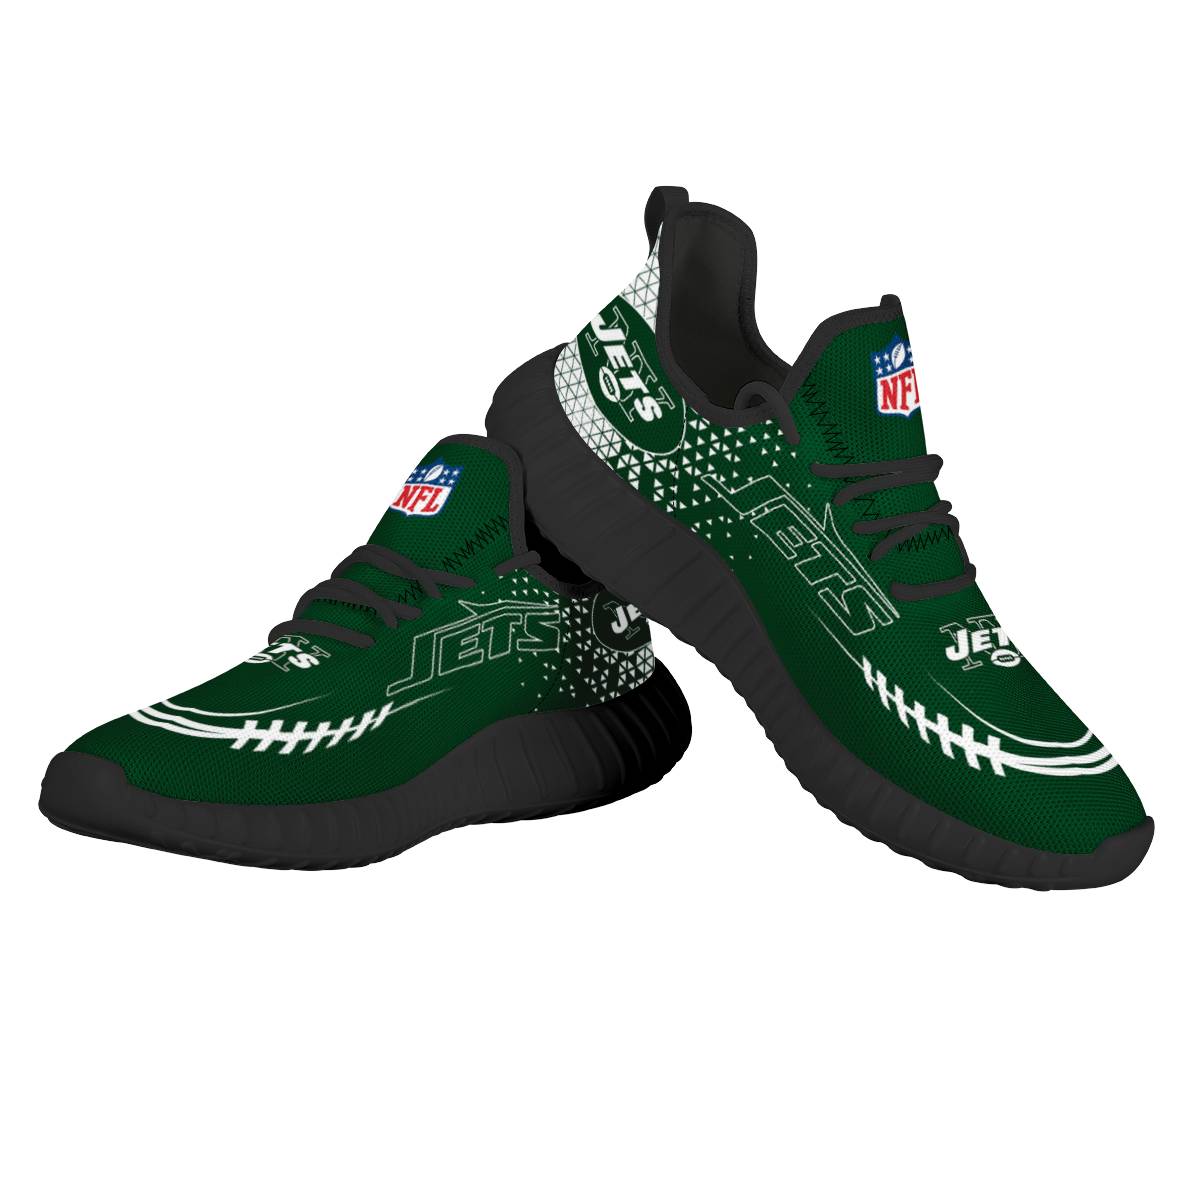 Men's NFL New York Jets Mesh Knit Sneakers/Shoes 001